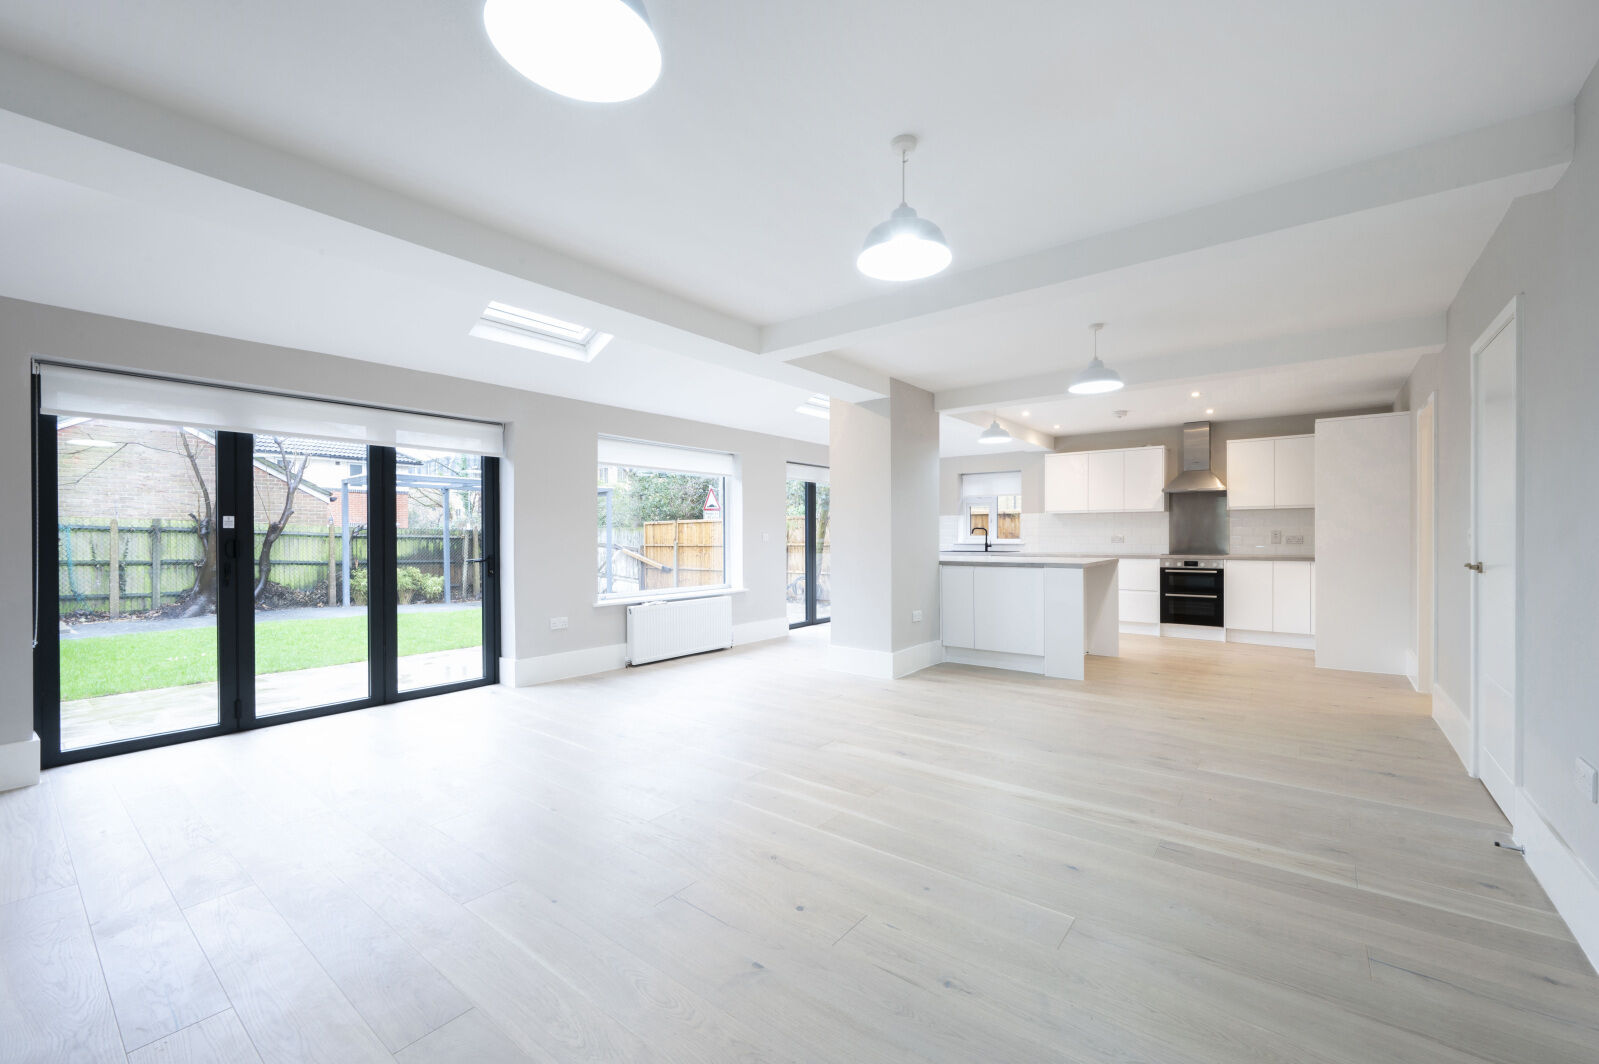 4 bedroom detached house to rent, Available now Akerman Road, Surbiton, KT6, main image